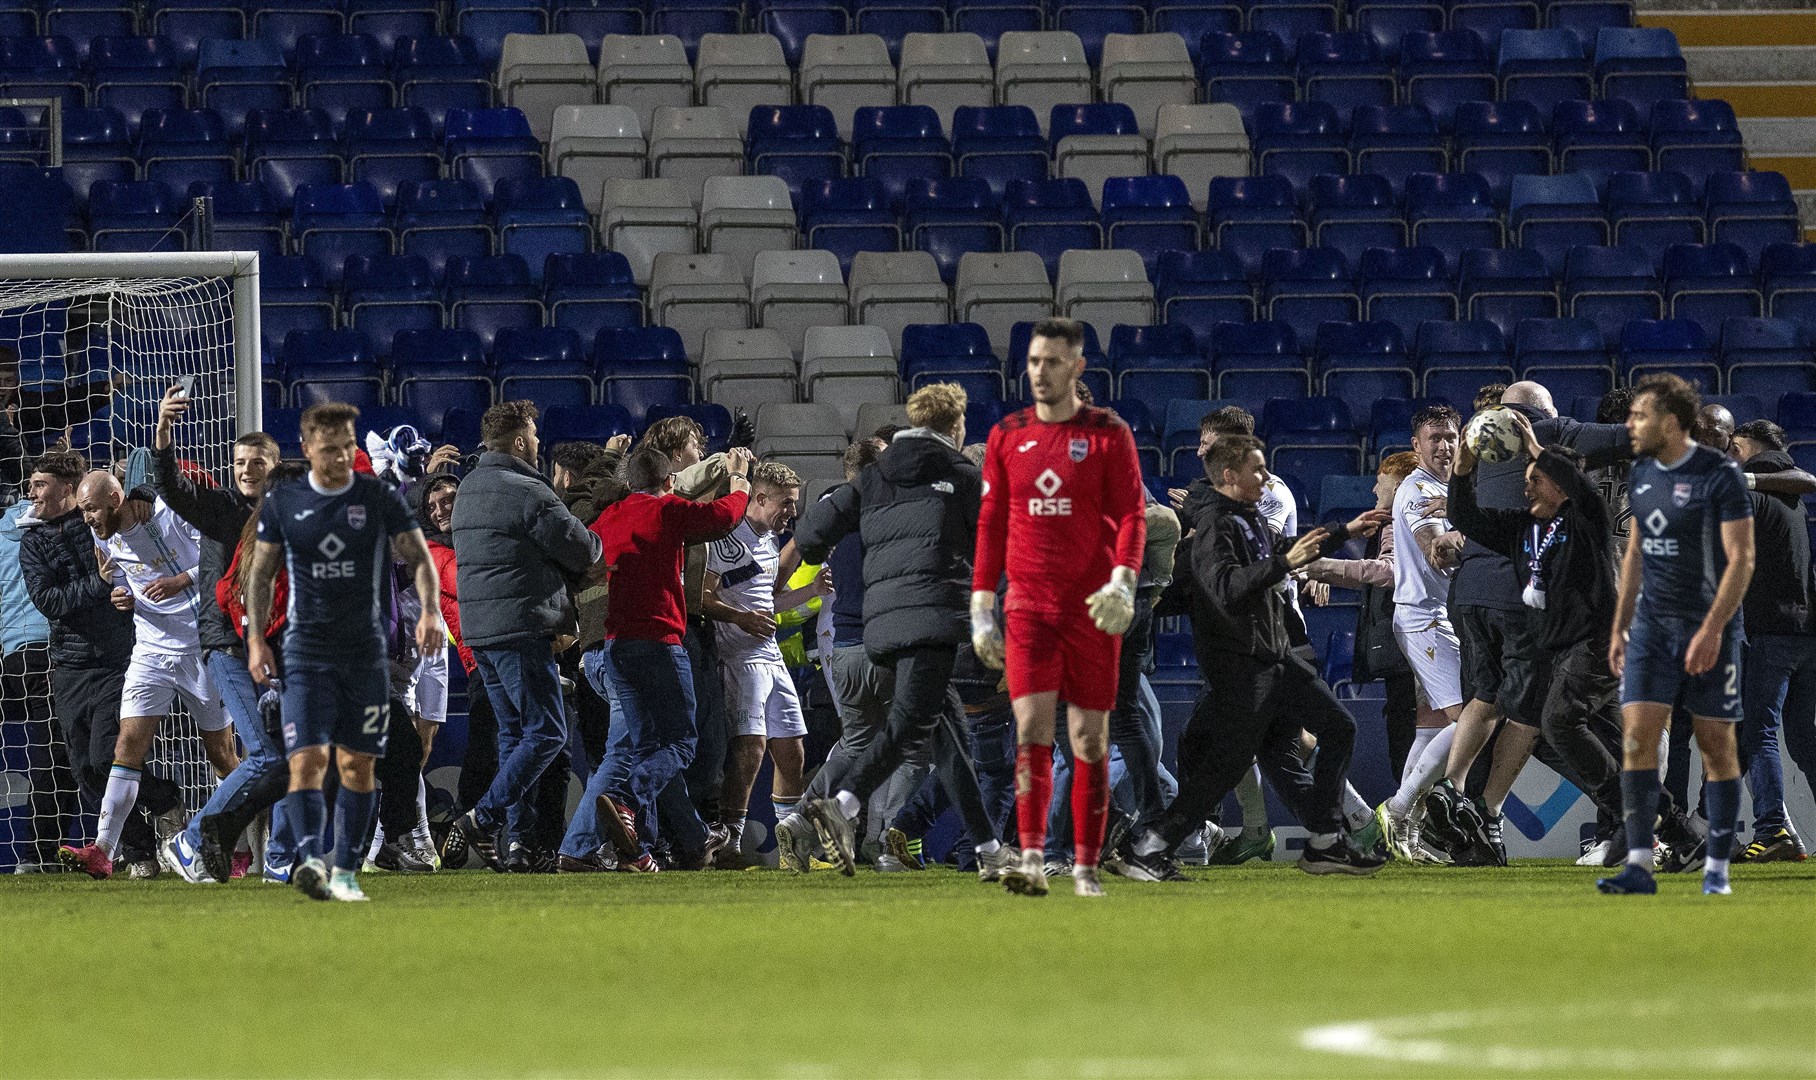 Despondent Ross County players could only watch as Dundee's fans and players celebrated last Saturday. Picture: Ken Macpherson